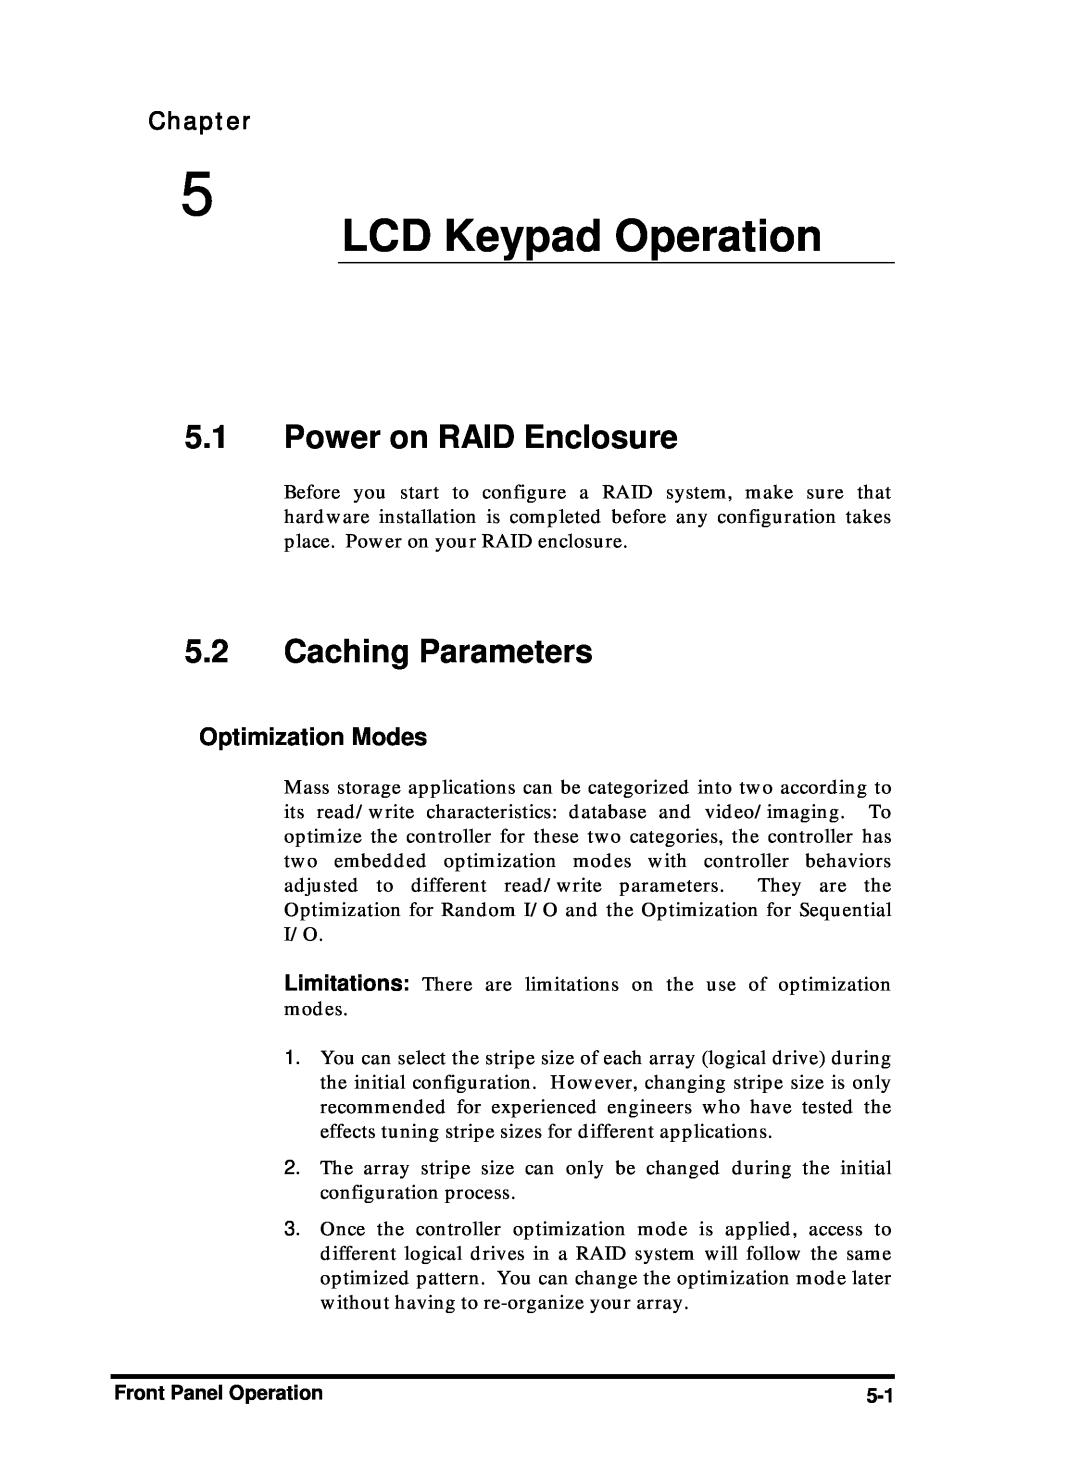 Compaq Infortrend manual LCD Keypad Operation, Power on RAID Enclosure, Caching Parameters, Optimization Modes, Chapter 